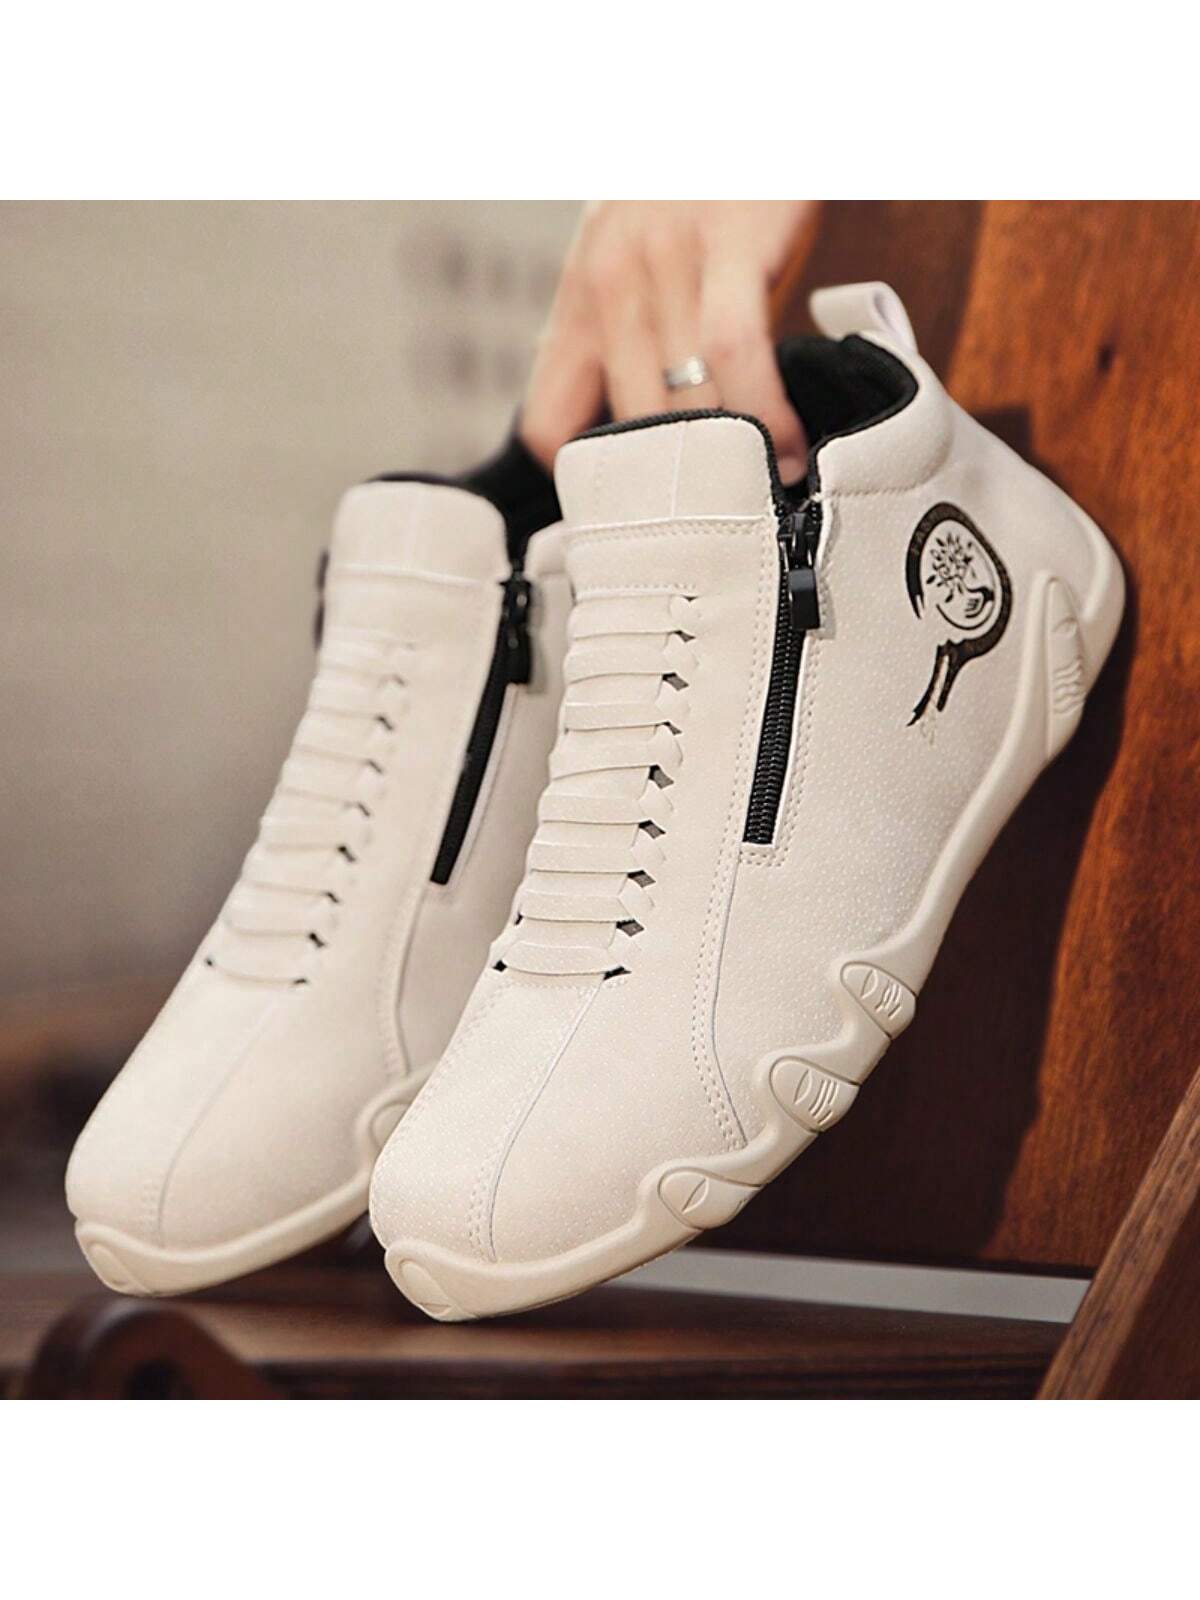 Autumn And Winter New Men's Casual Zip Up Side Shoes